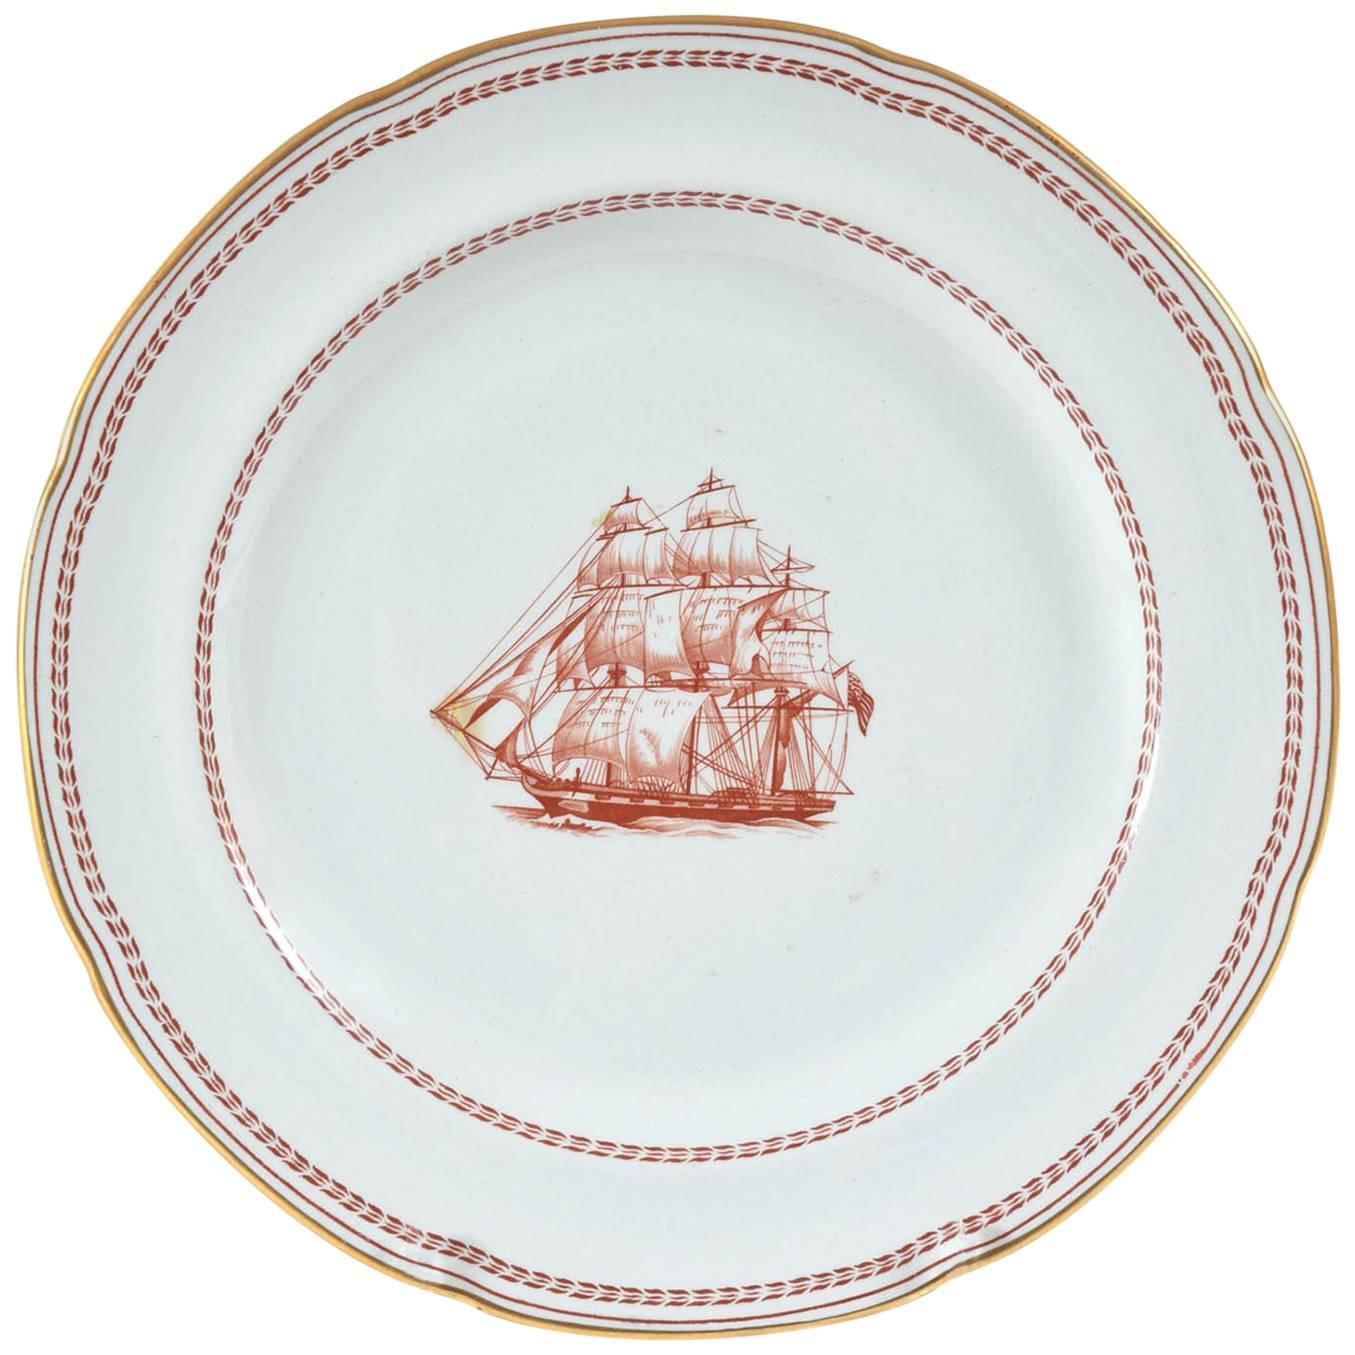 Dinner Plate, Spode England "Tradewinds", Chinese Export Style